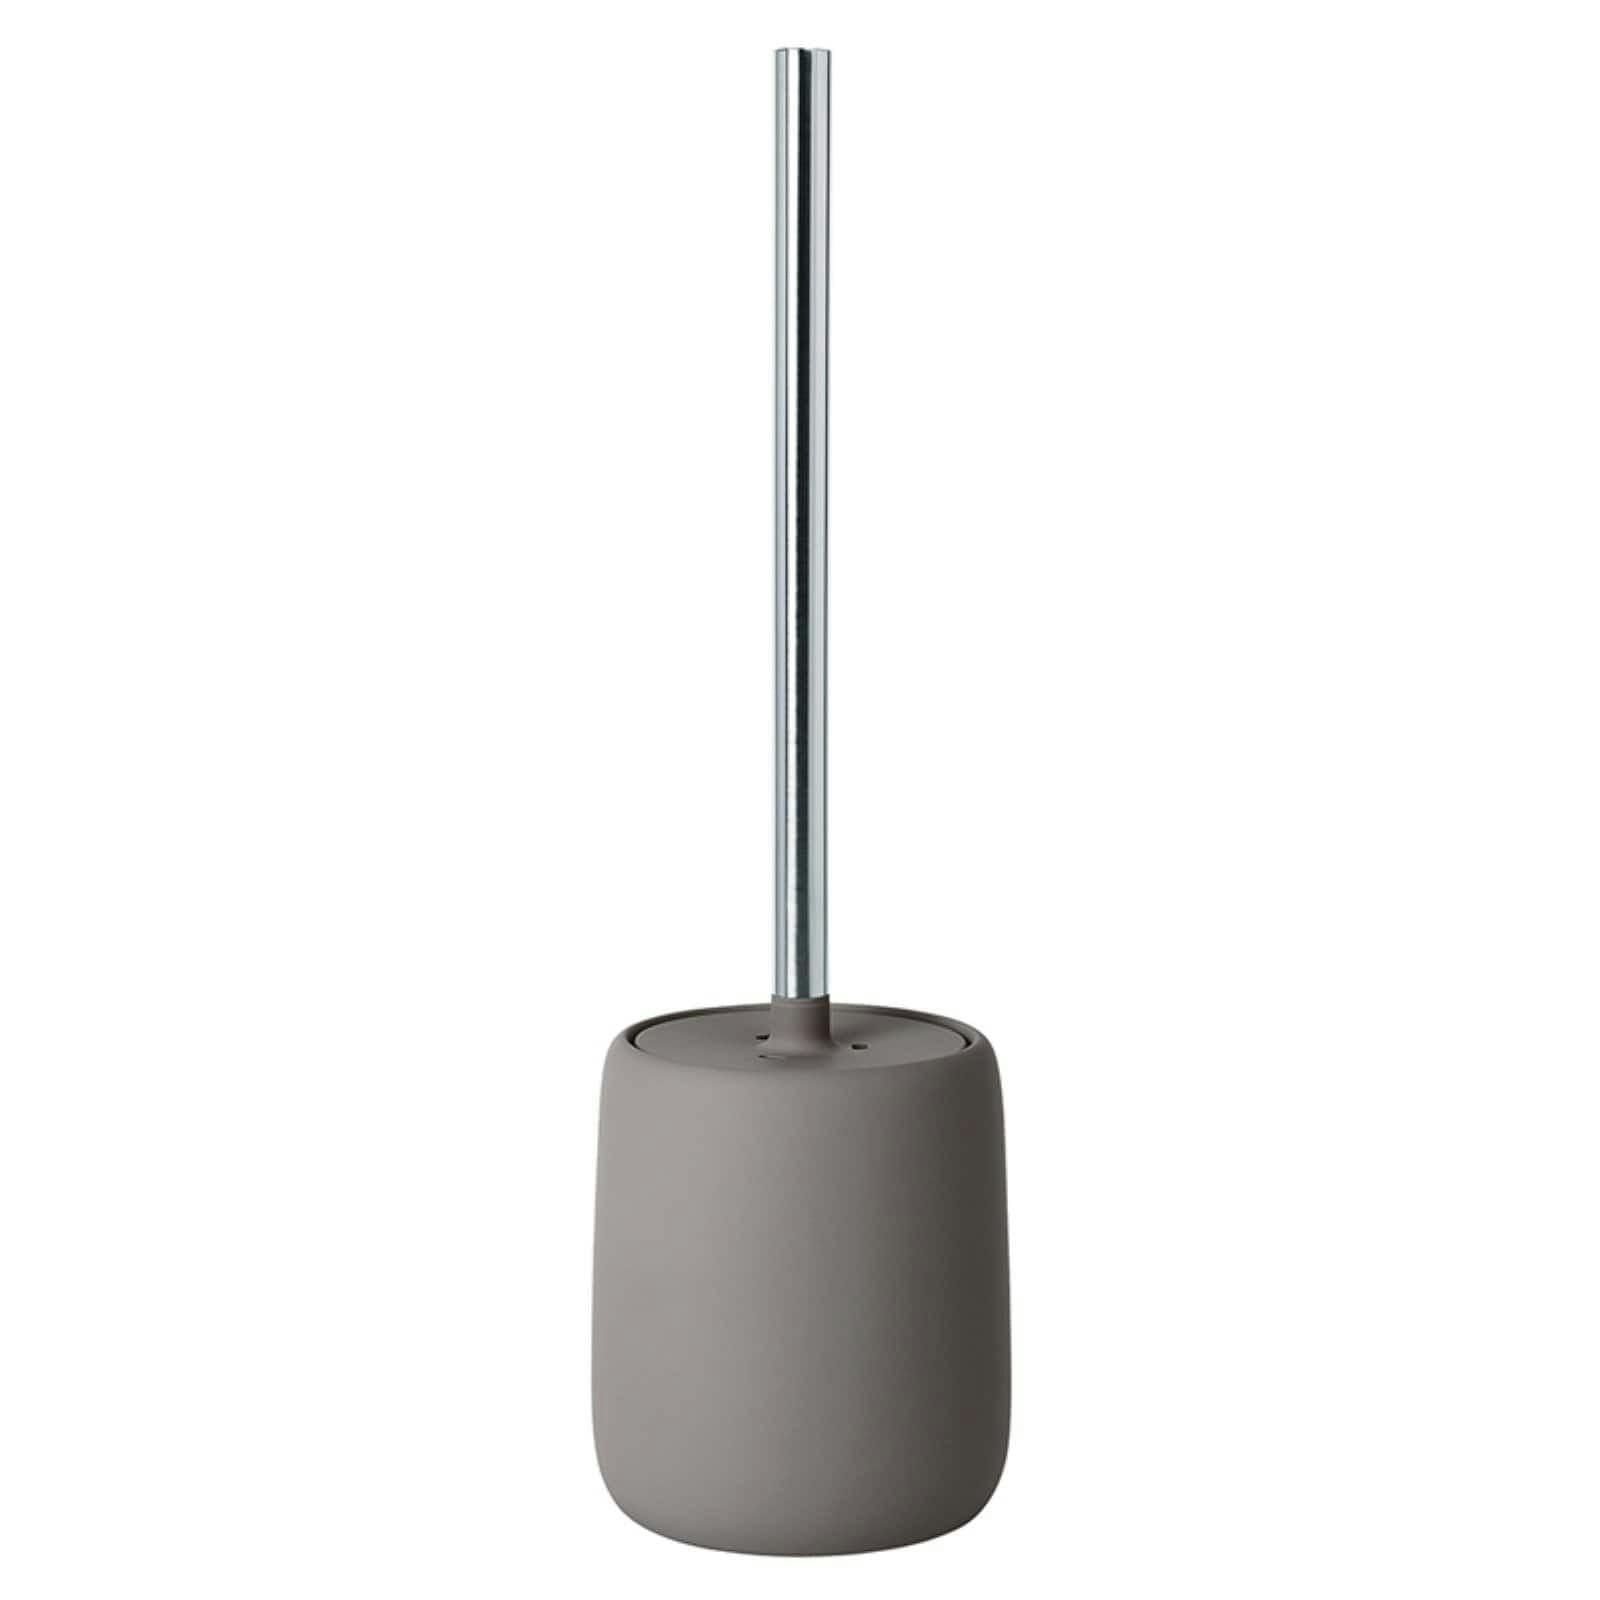 Sono Rounded Ceramic and Silicone Toilet Brush with Holder - Taupe